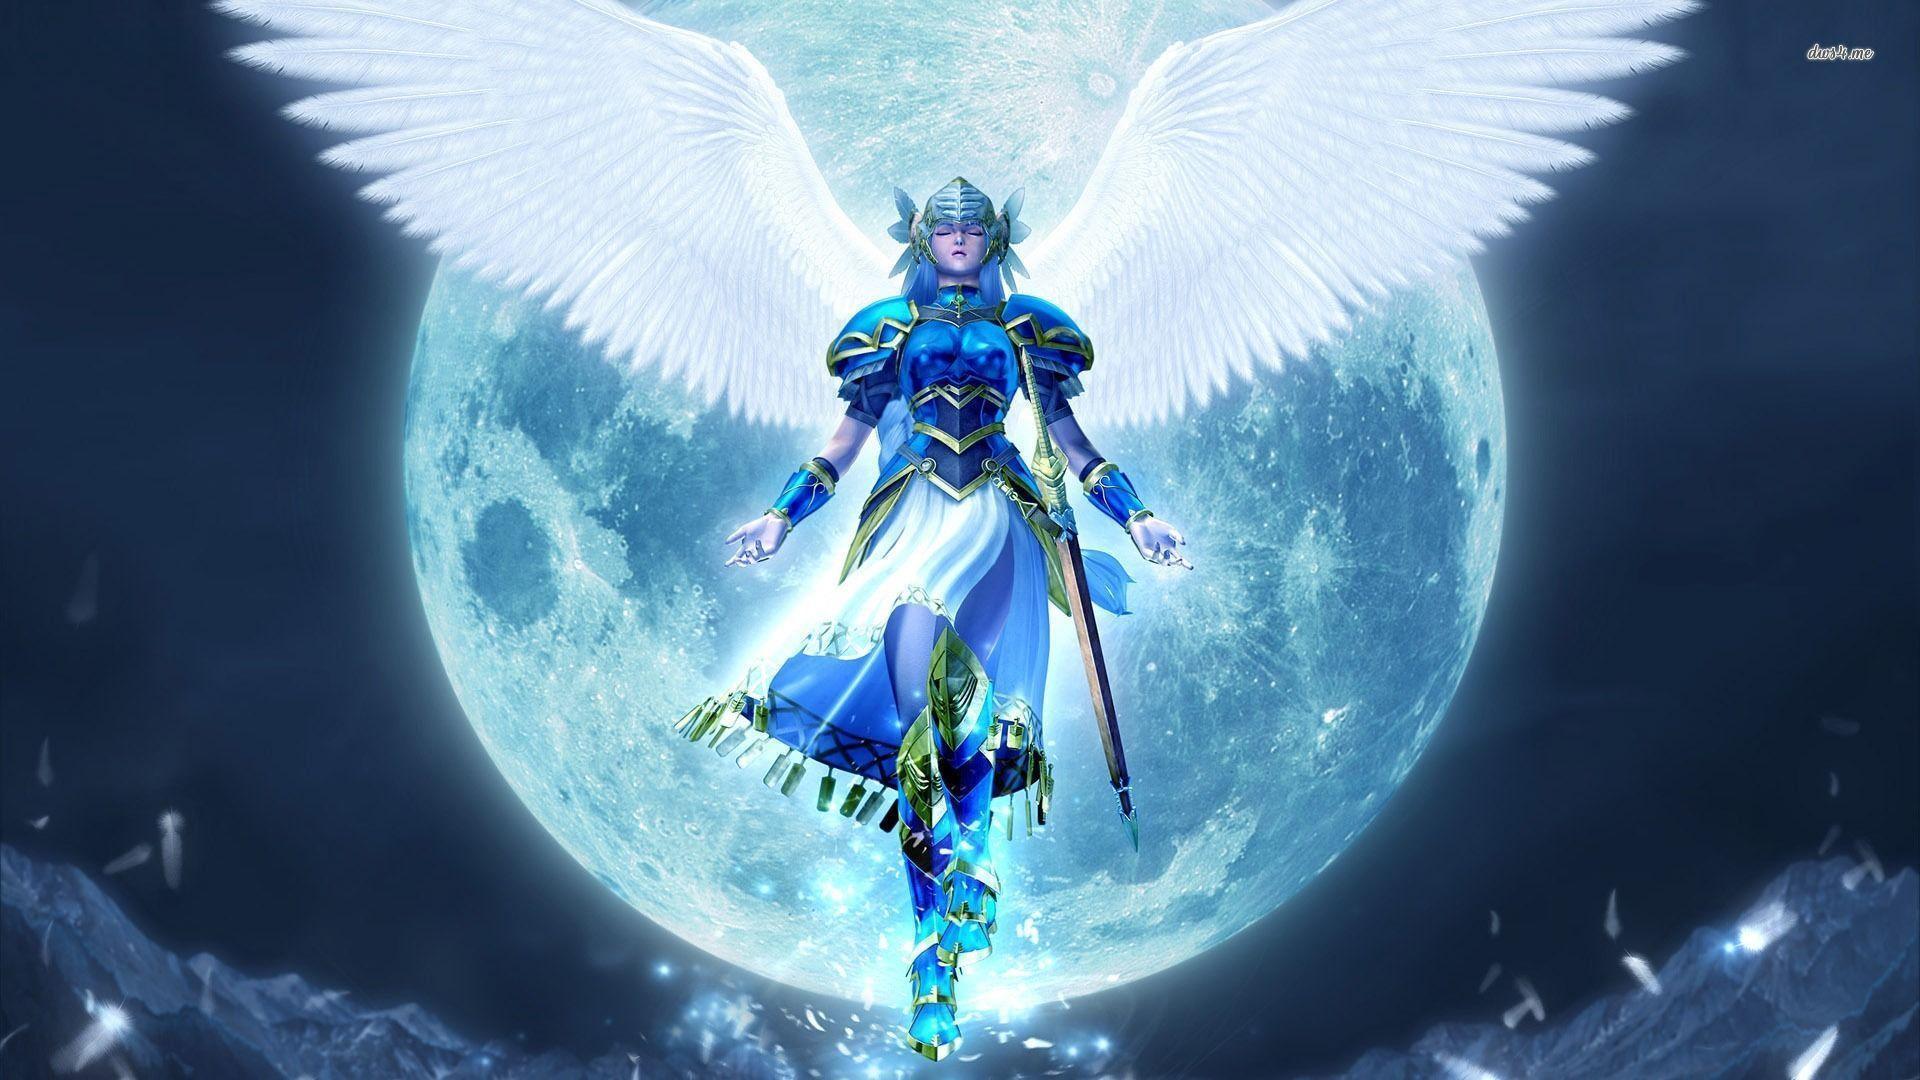 Anime Warrior Angel Wallpaper Image & Picture